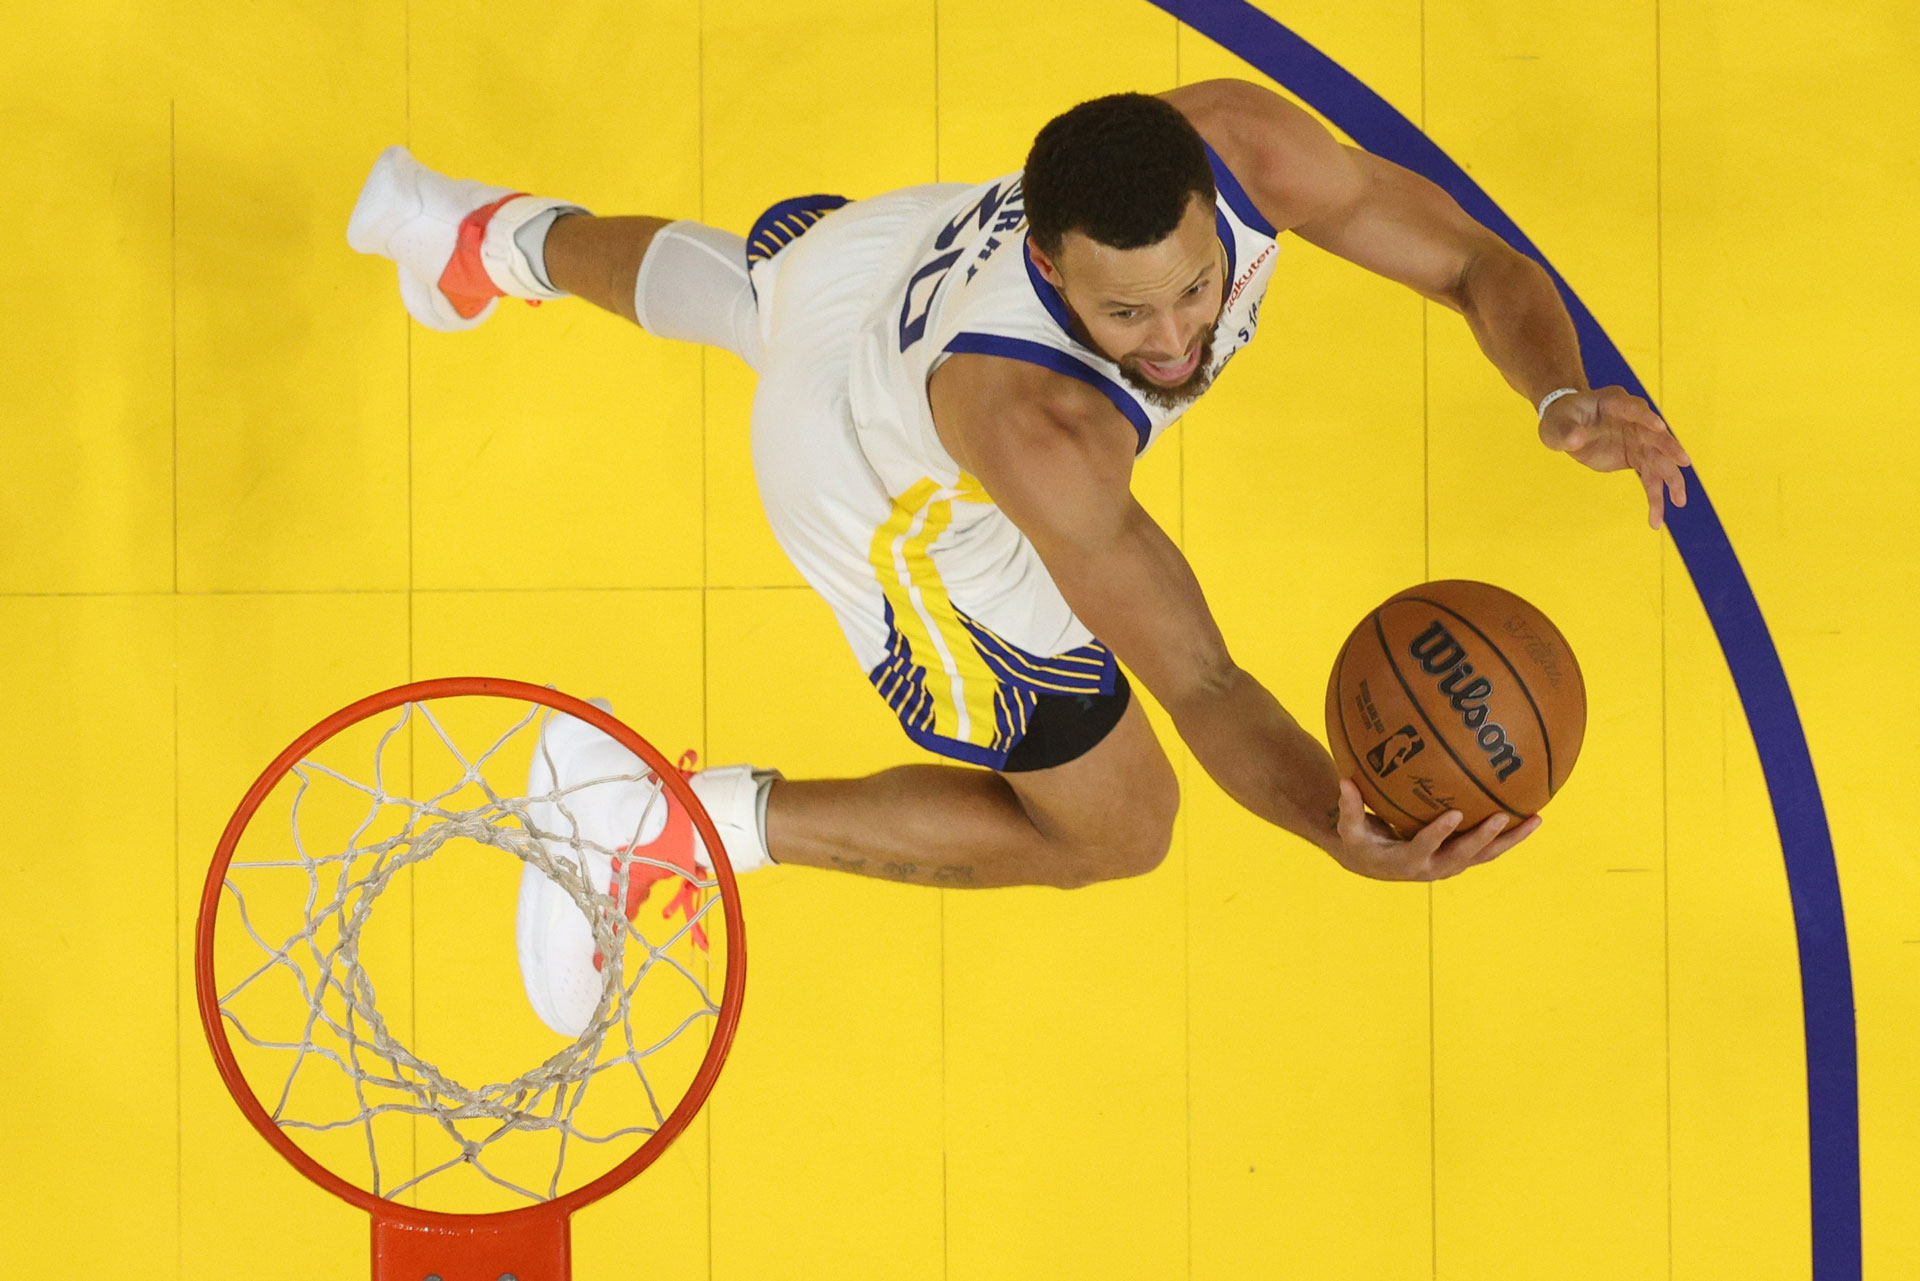 Stephen Curry has officially become the best 3-point shooter in NBA history